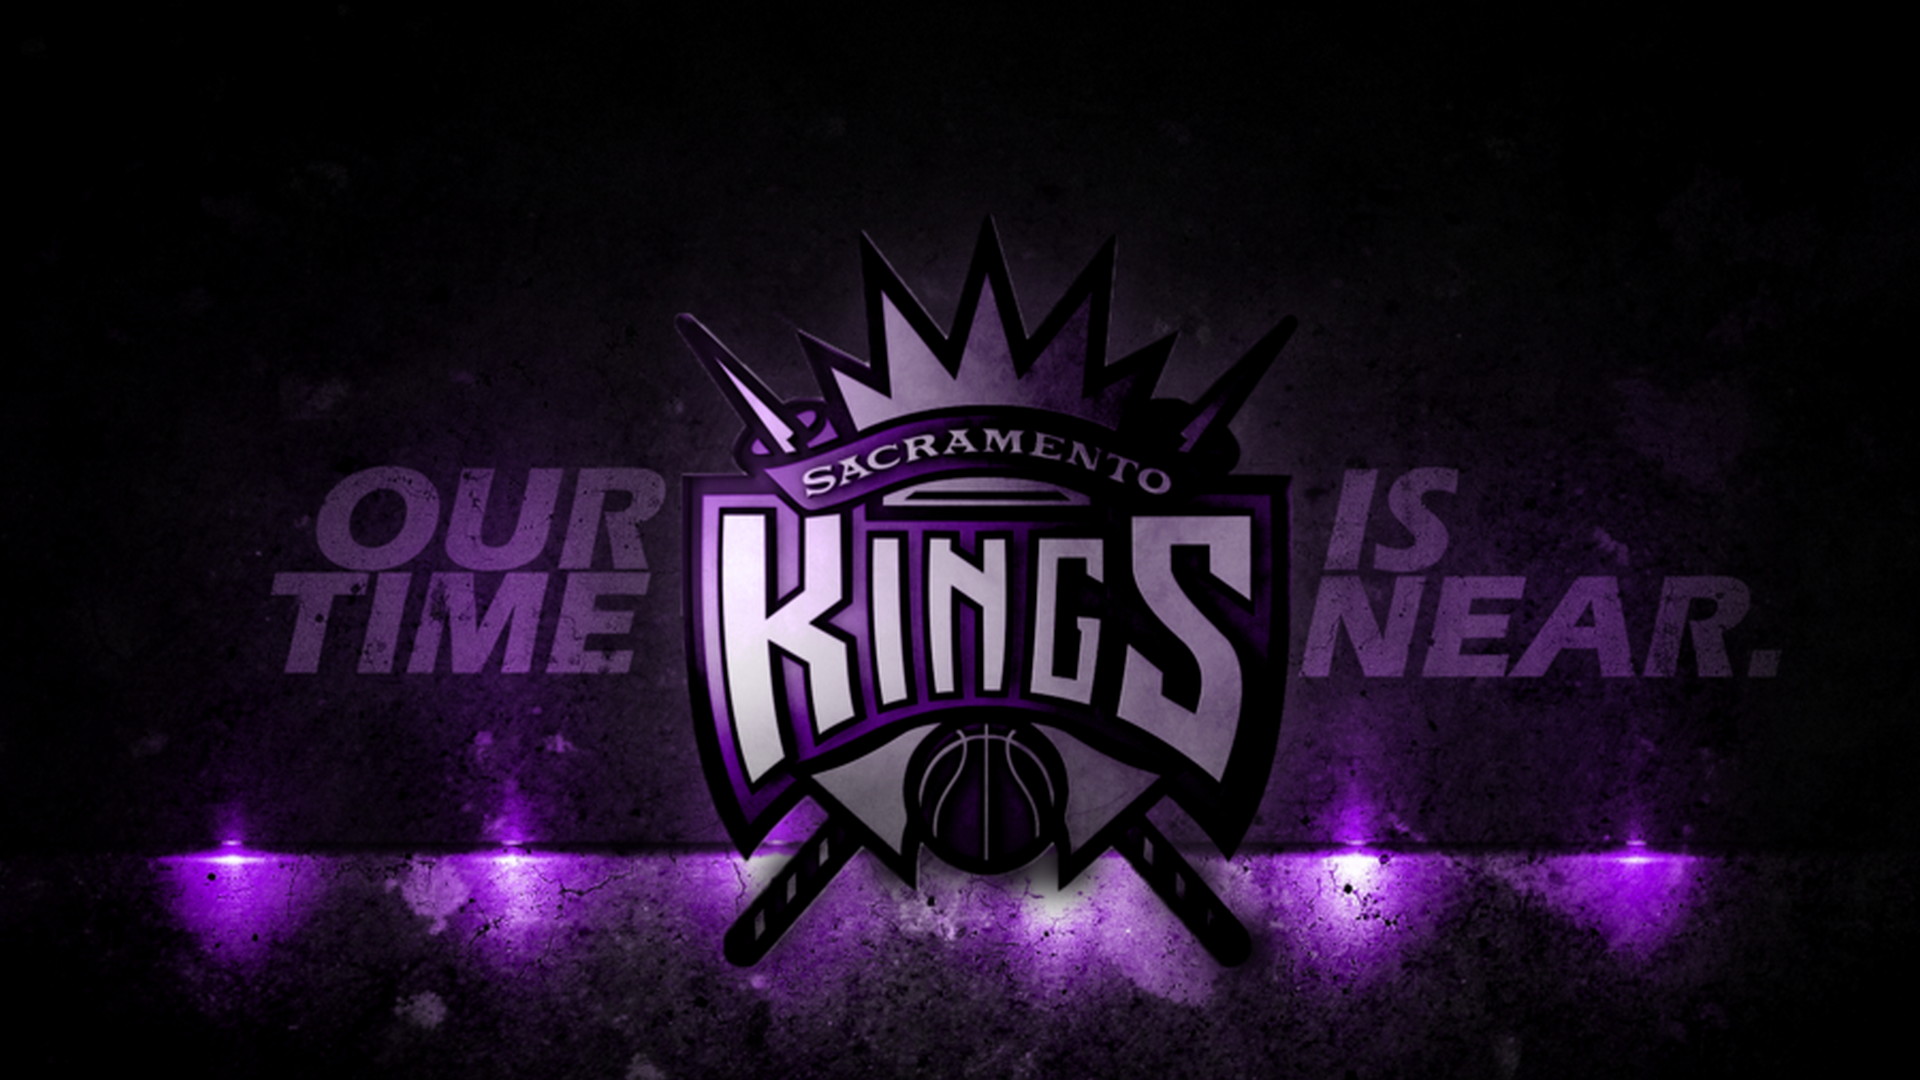 Wallpaper Desktop Sacramento Kings HD with high-resolution 1920x1080 pixel. You can use this wallpaper for your Desktop Computer Backgrounds, Windows or Mac Screensavers, iPhone Lock screen, Tablet or Android and another Mobile Phone device